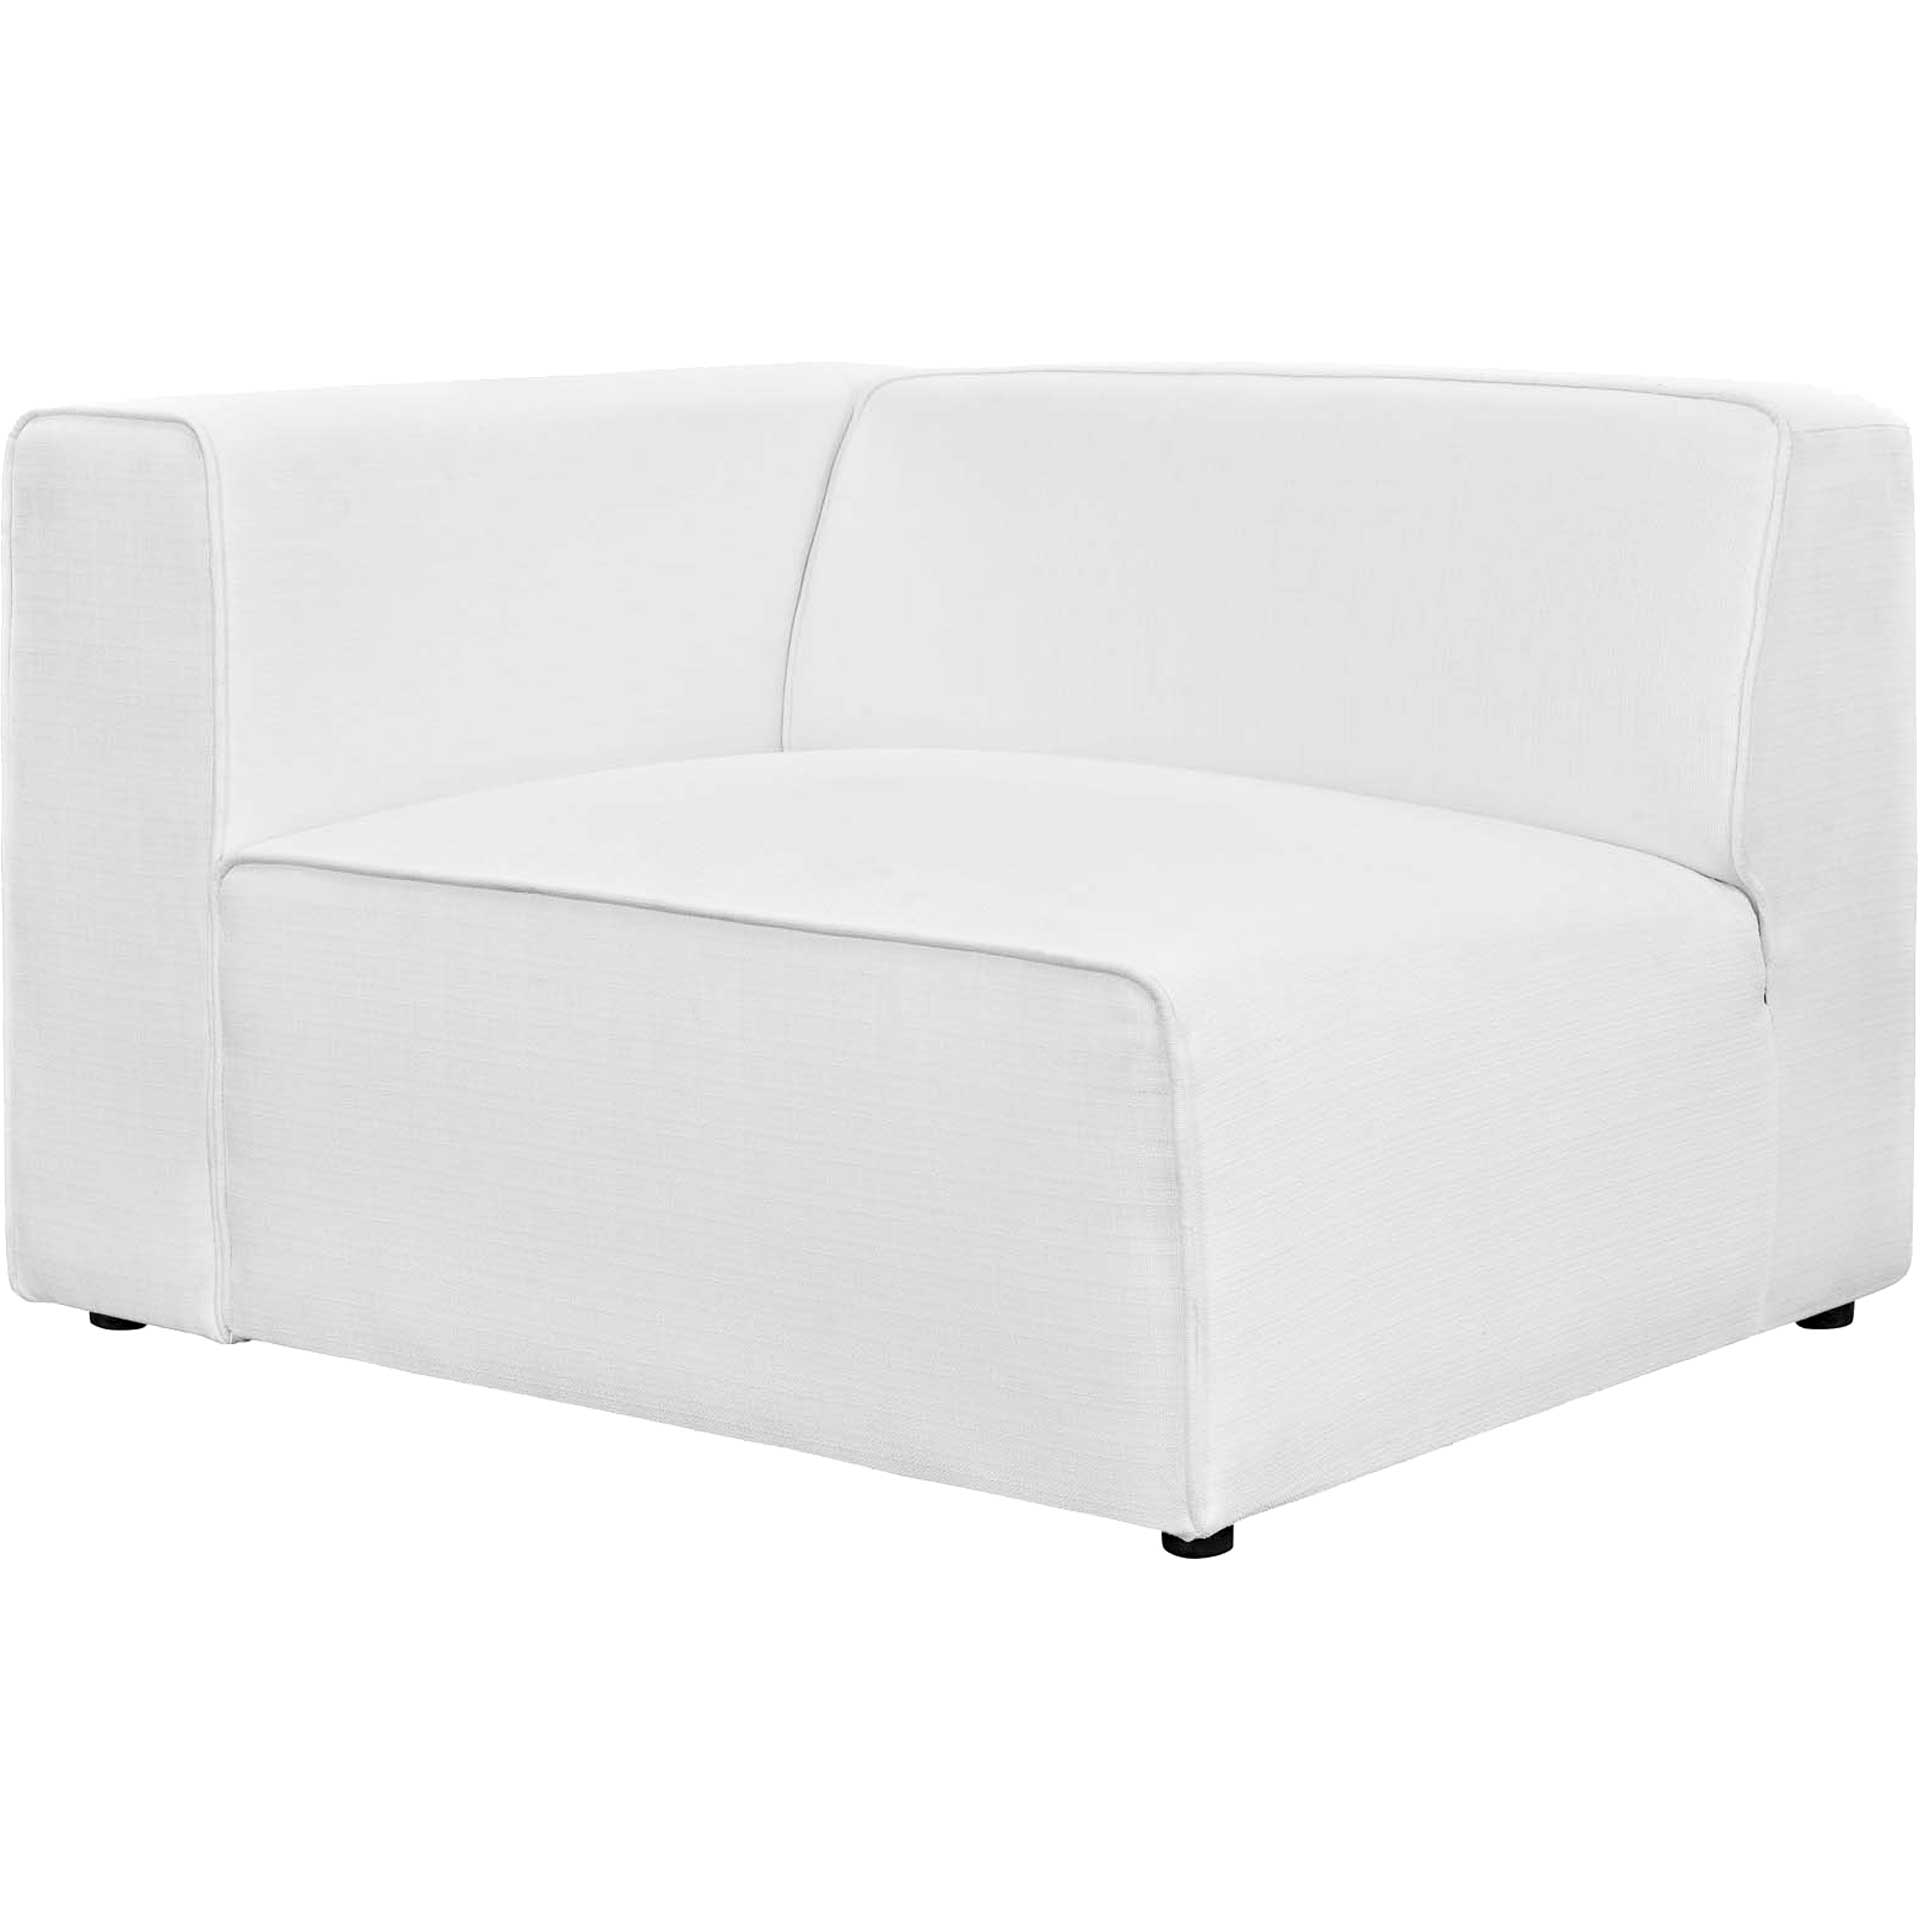 Maisie 5 Piece L-Shaped Sectional Sofa White